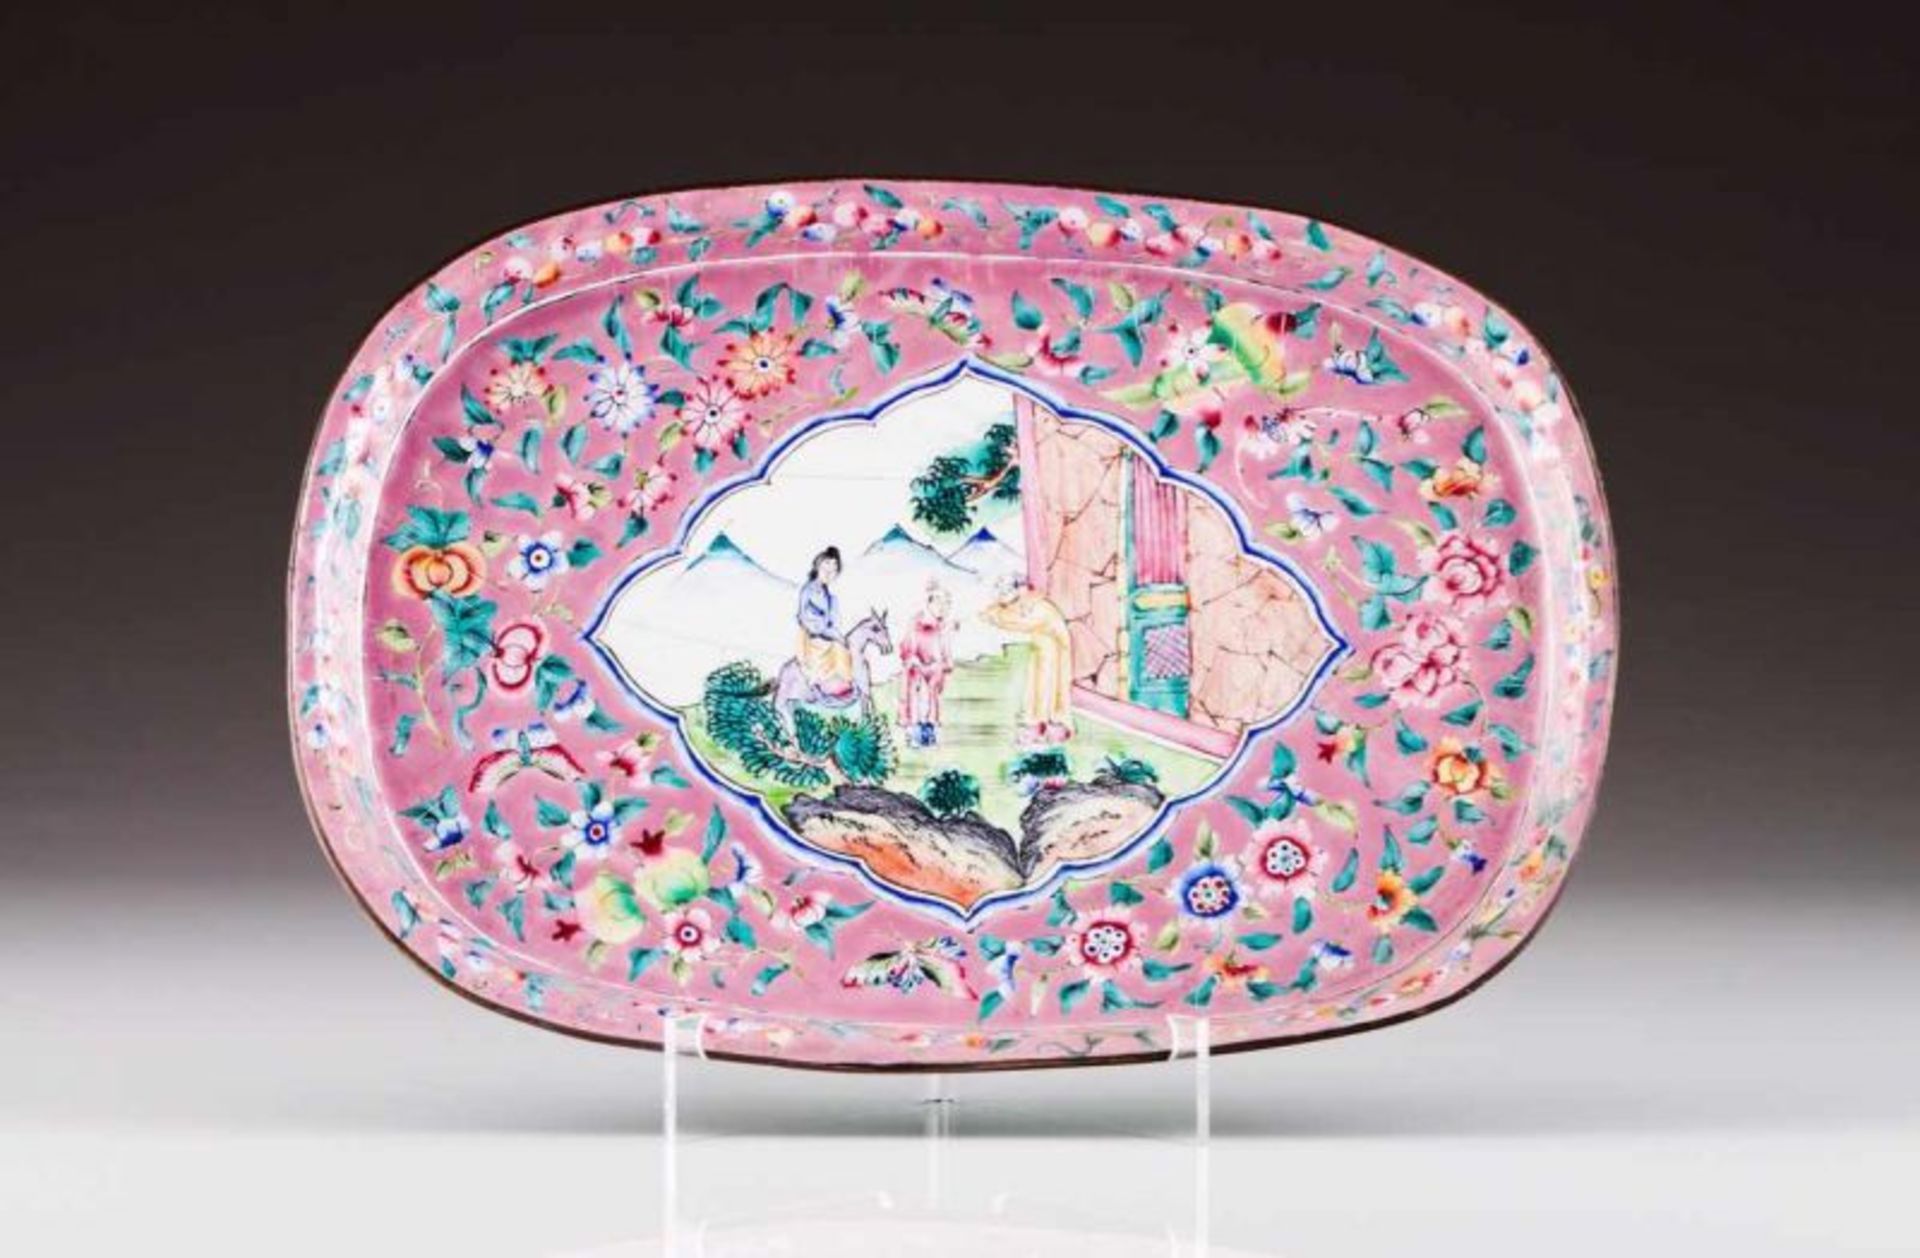 A dish Polychrome enamel on yellow metal Decorated with floral pattern on pink ground, depicting